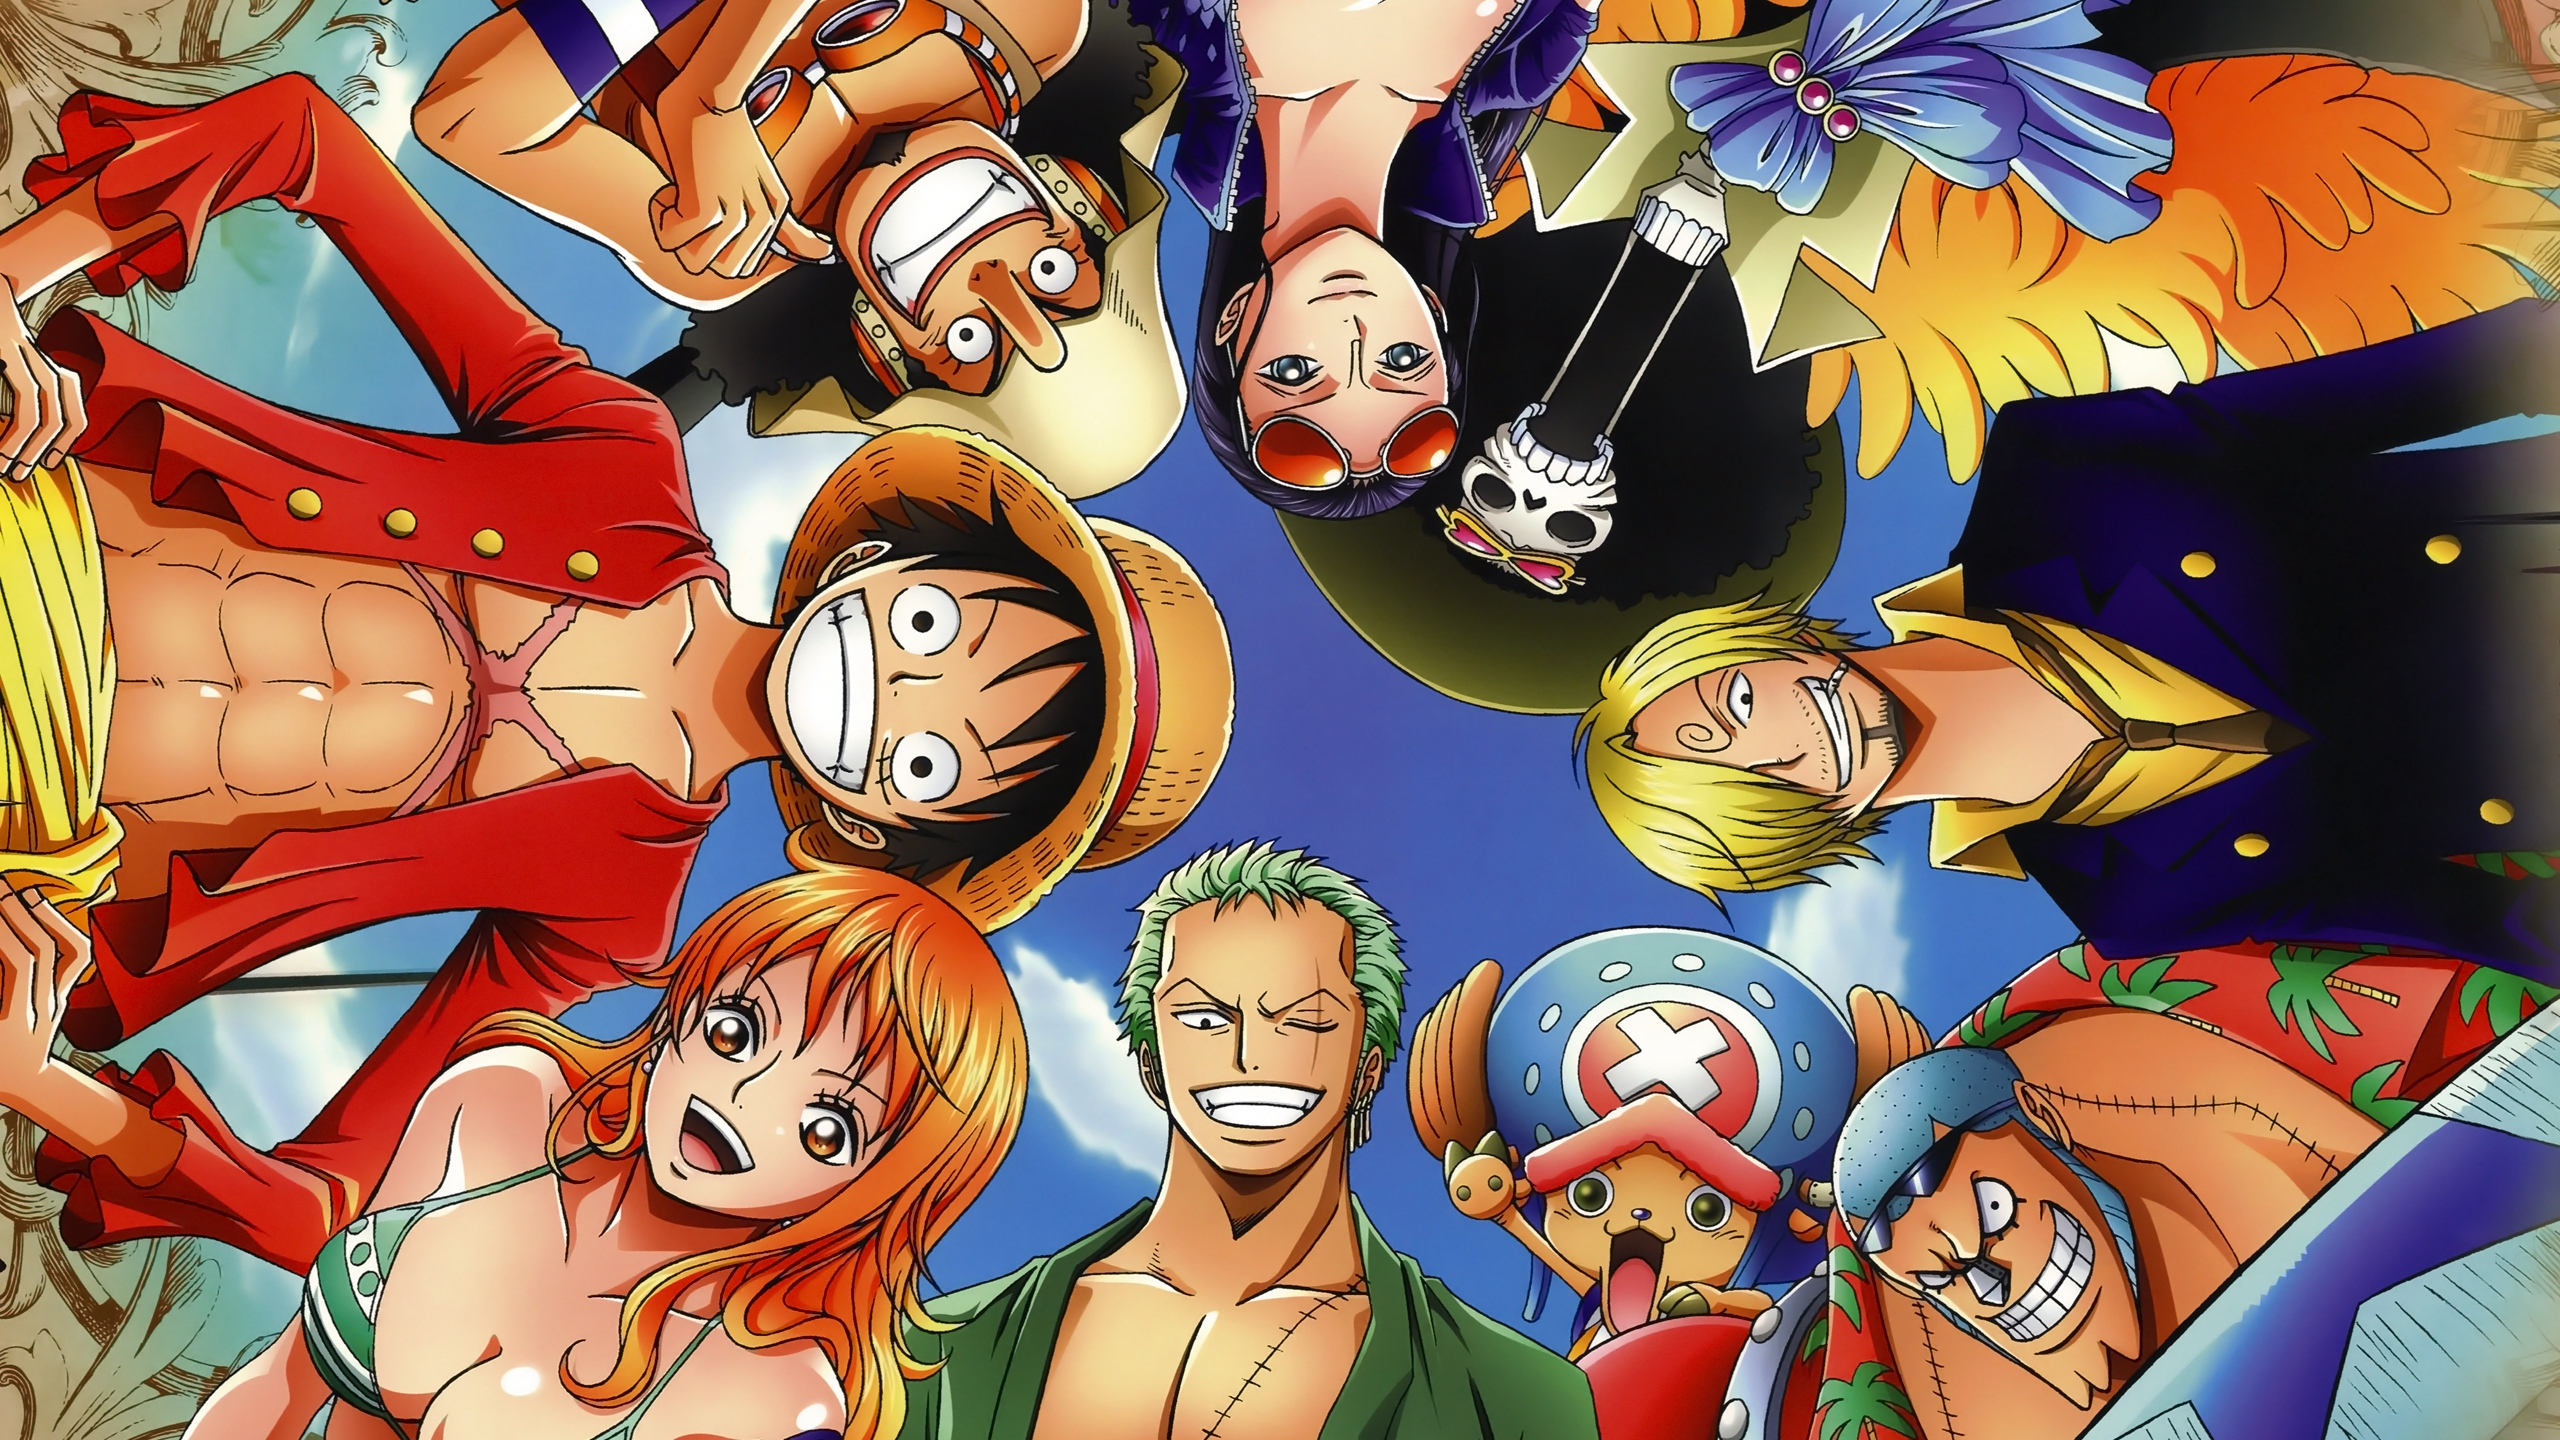 2560x1440 3600+ Anime One Piece HD Wallpapers and Backgrounds